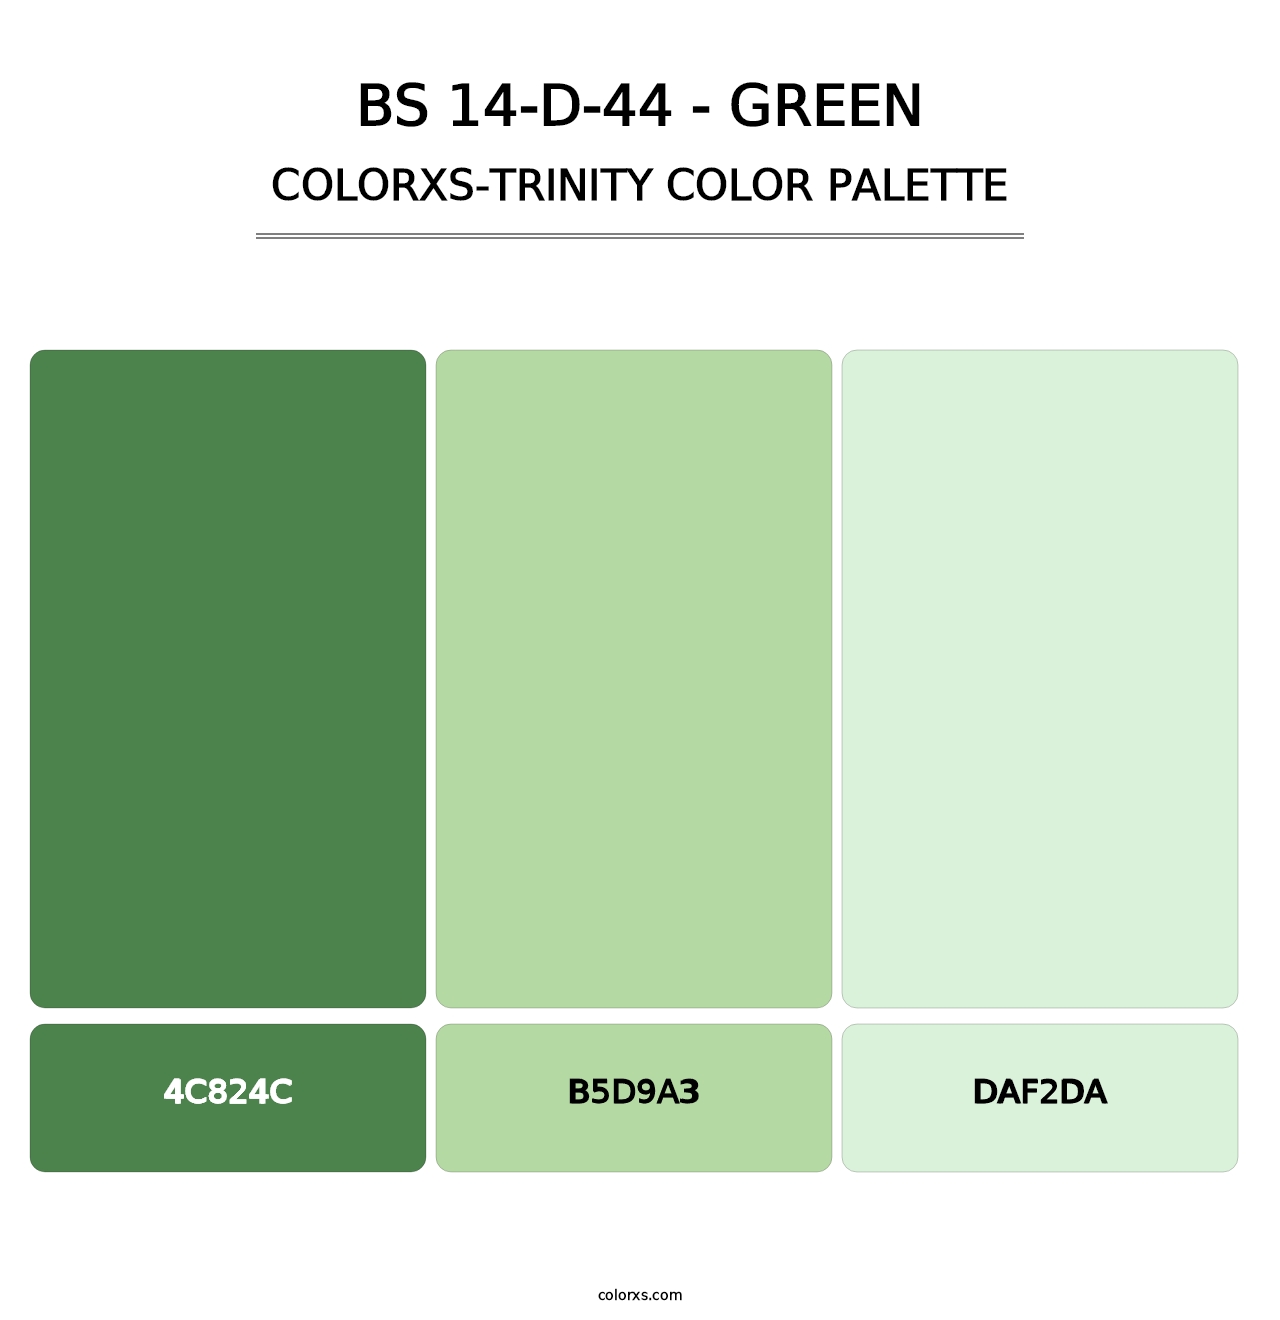 BS 14-D-44 - Green - Colorxs Trinity Palette